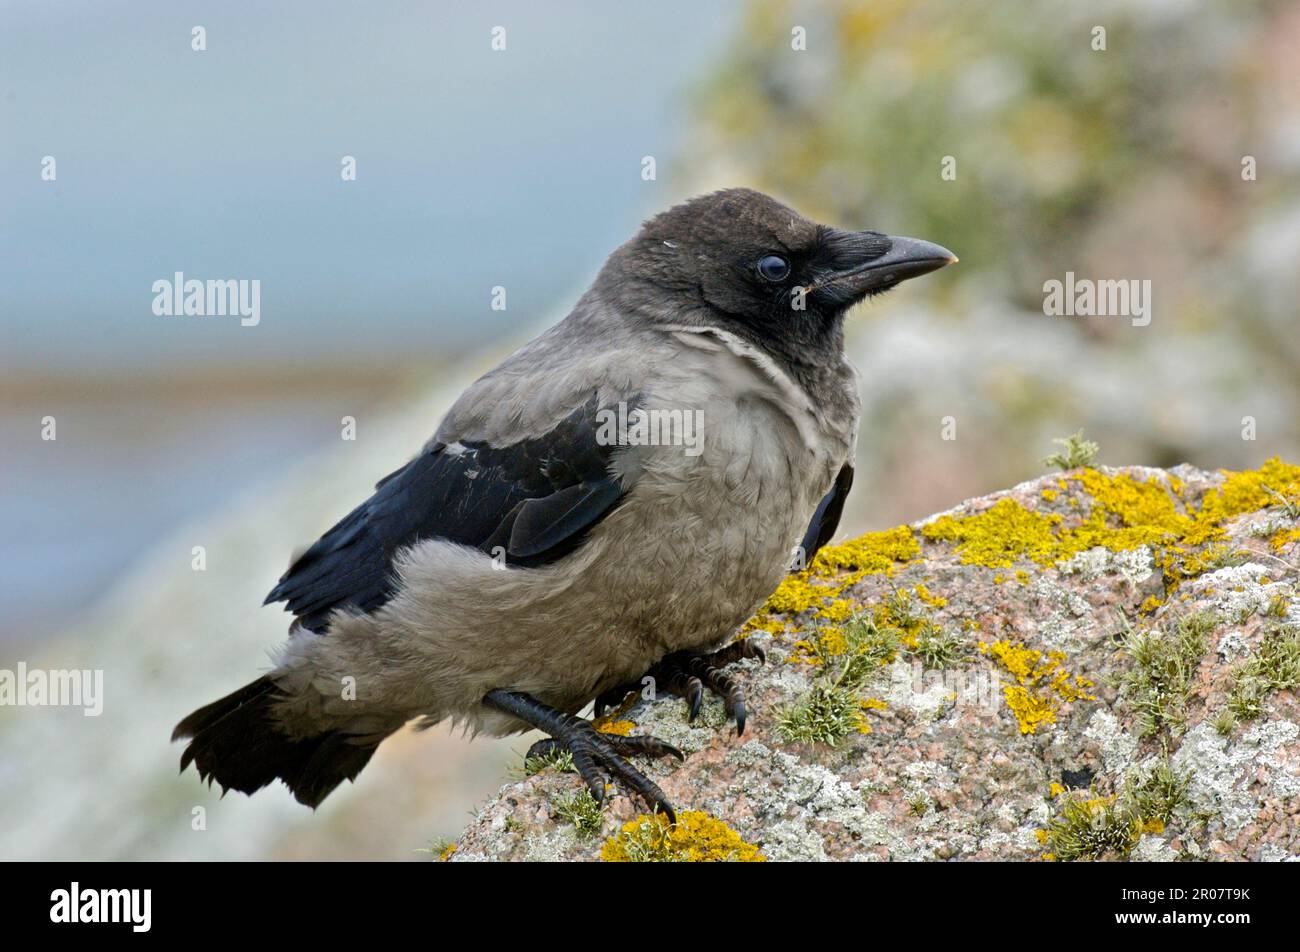 Hooded Crow, hooded crows (Corvus corone cornix) Crow, Corvids, Songbirds, Animals, Birds, Hooded Crow juvenile, perched on rock, Tiree, Inner Stock Photo